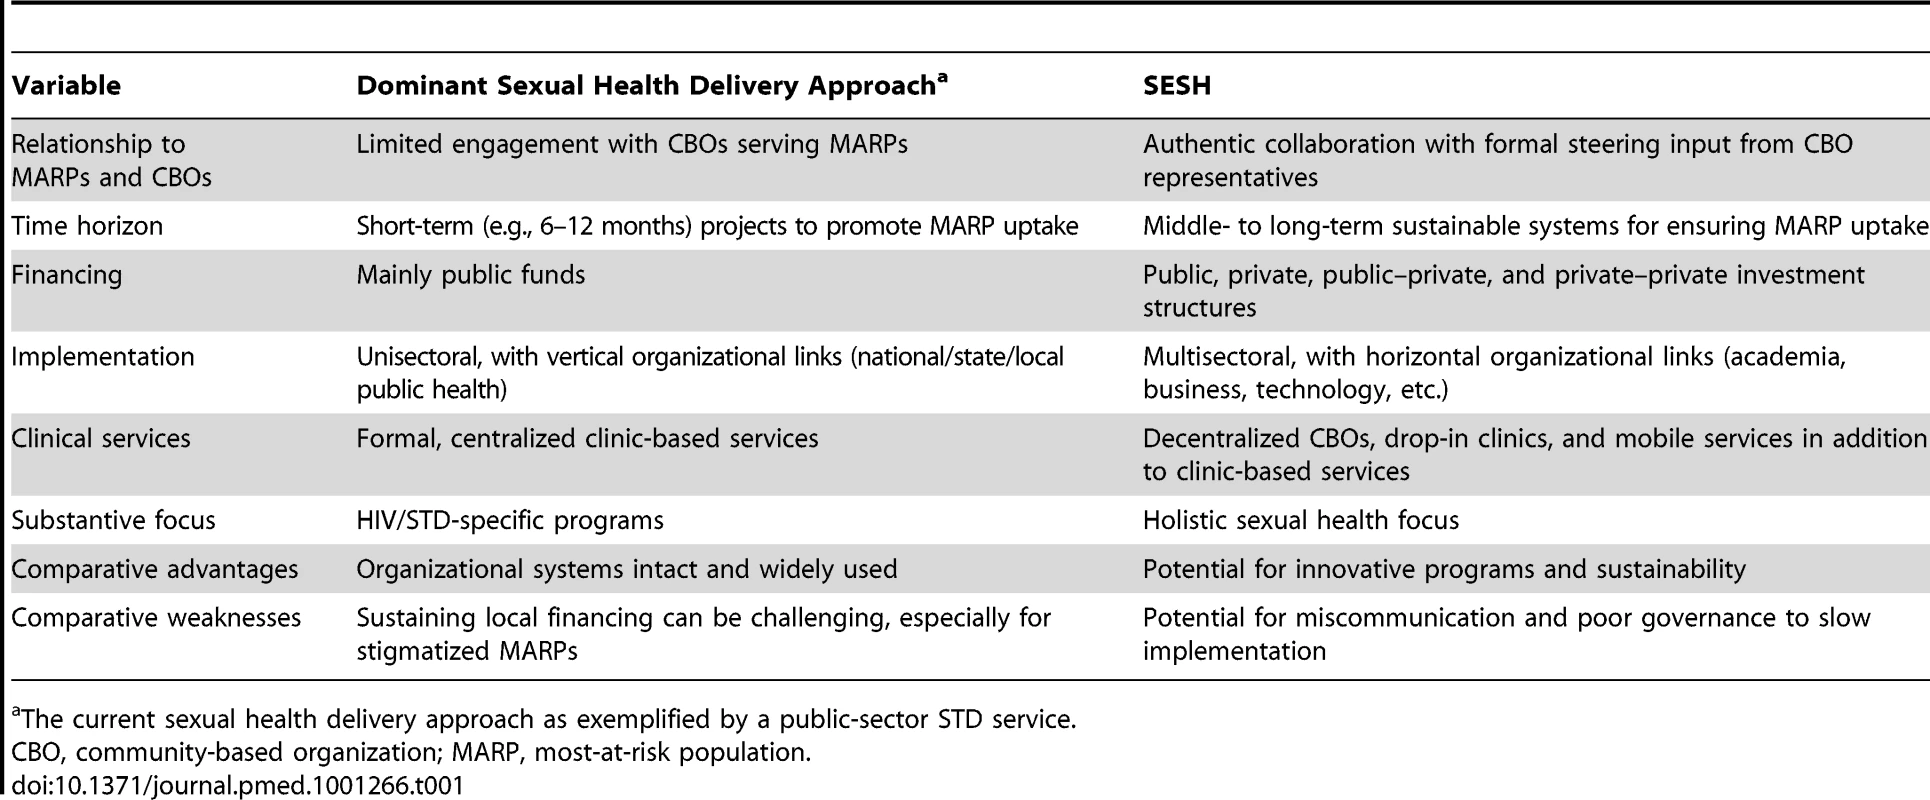 Overview of the dominant current sexual health delivery system and the SESH delivery system.